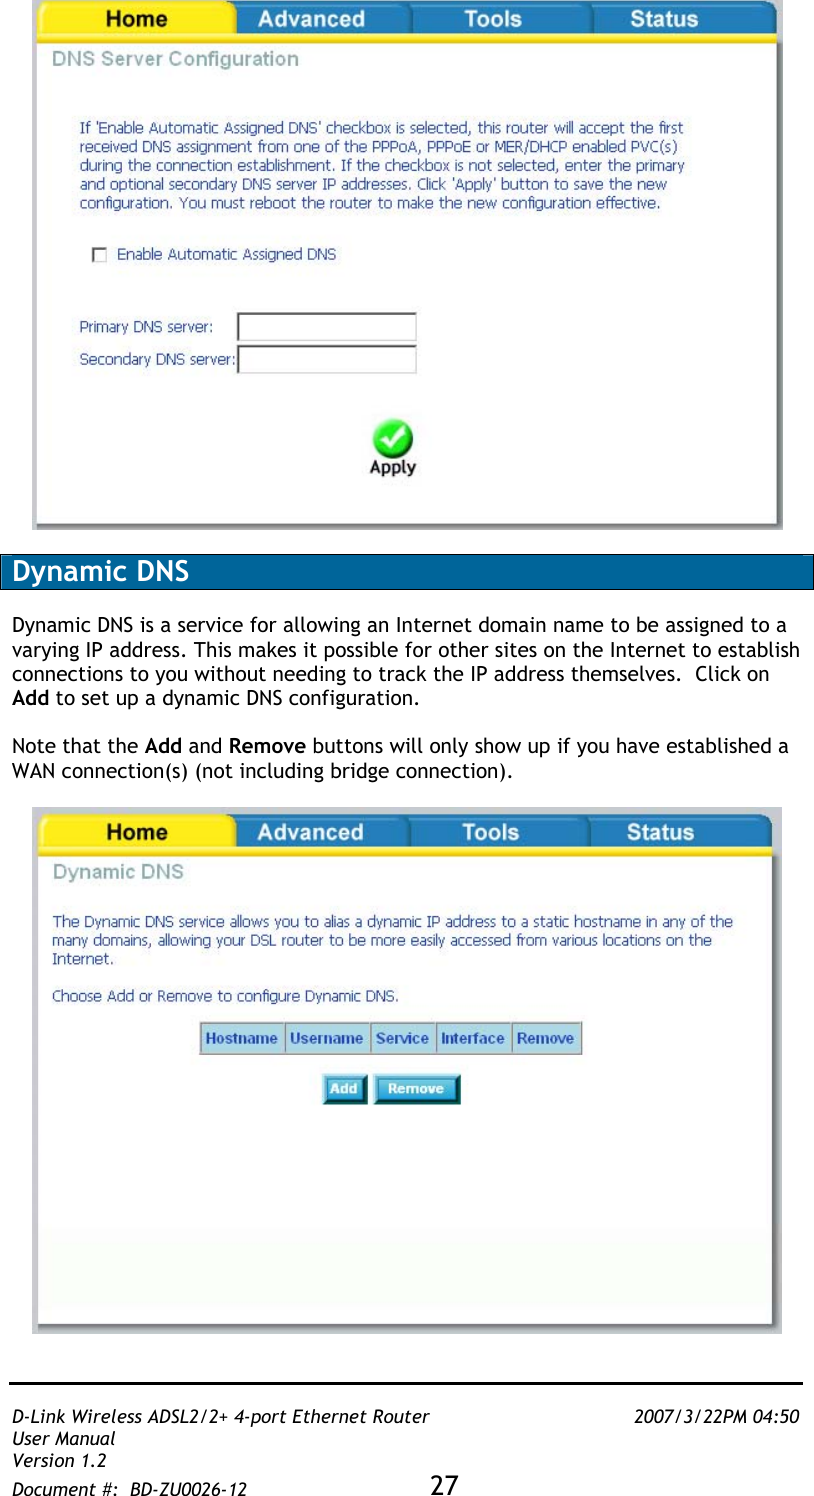   D-Link Wireless ADSL2/2+ 4-port Ethernet Router    2007/3/22PM 04:50 User Manual   Version 1.2 Document #:  BD-ZU0026-12 27     Dynamic DNS  Dynamic DNS is a service for allowing an Internet domain name to be assigned to a varying IP address. This makes it possible for other sites on the Internet to establish connections to you without needing to track the IP address themselves.  Click on Add to set up a dynamic DNS configuration.  Note that the Add and Remove buttons will only show up if you have established a WAN connection(s) (not including bridge connection).    